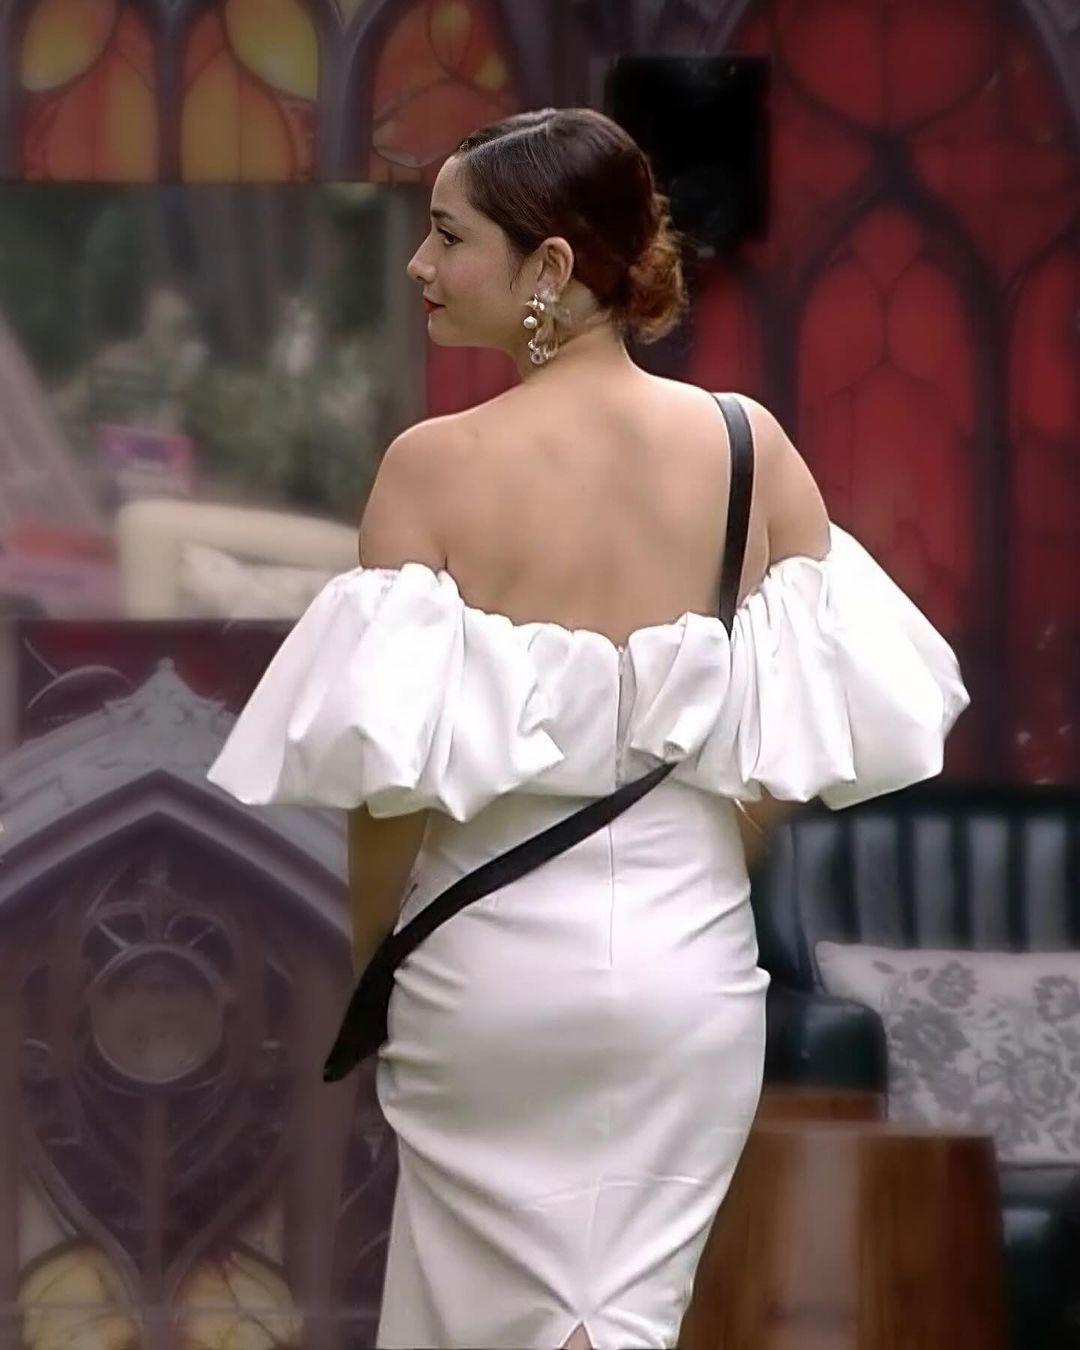 In one of the episodes of Bigg Boss 17, Ankita Lokhande wore a stunning off-shoulder white dress. She tied her hair in a chic bun, and the contrasting bold red lipstick stole the show